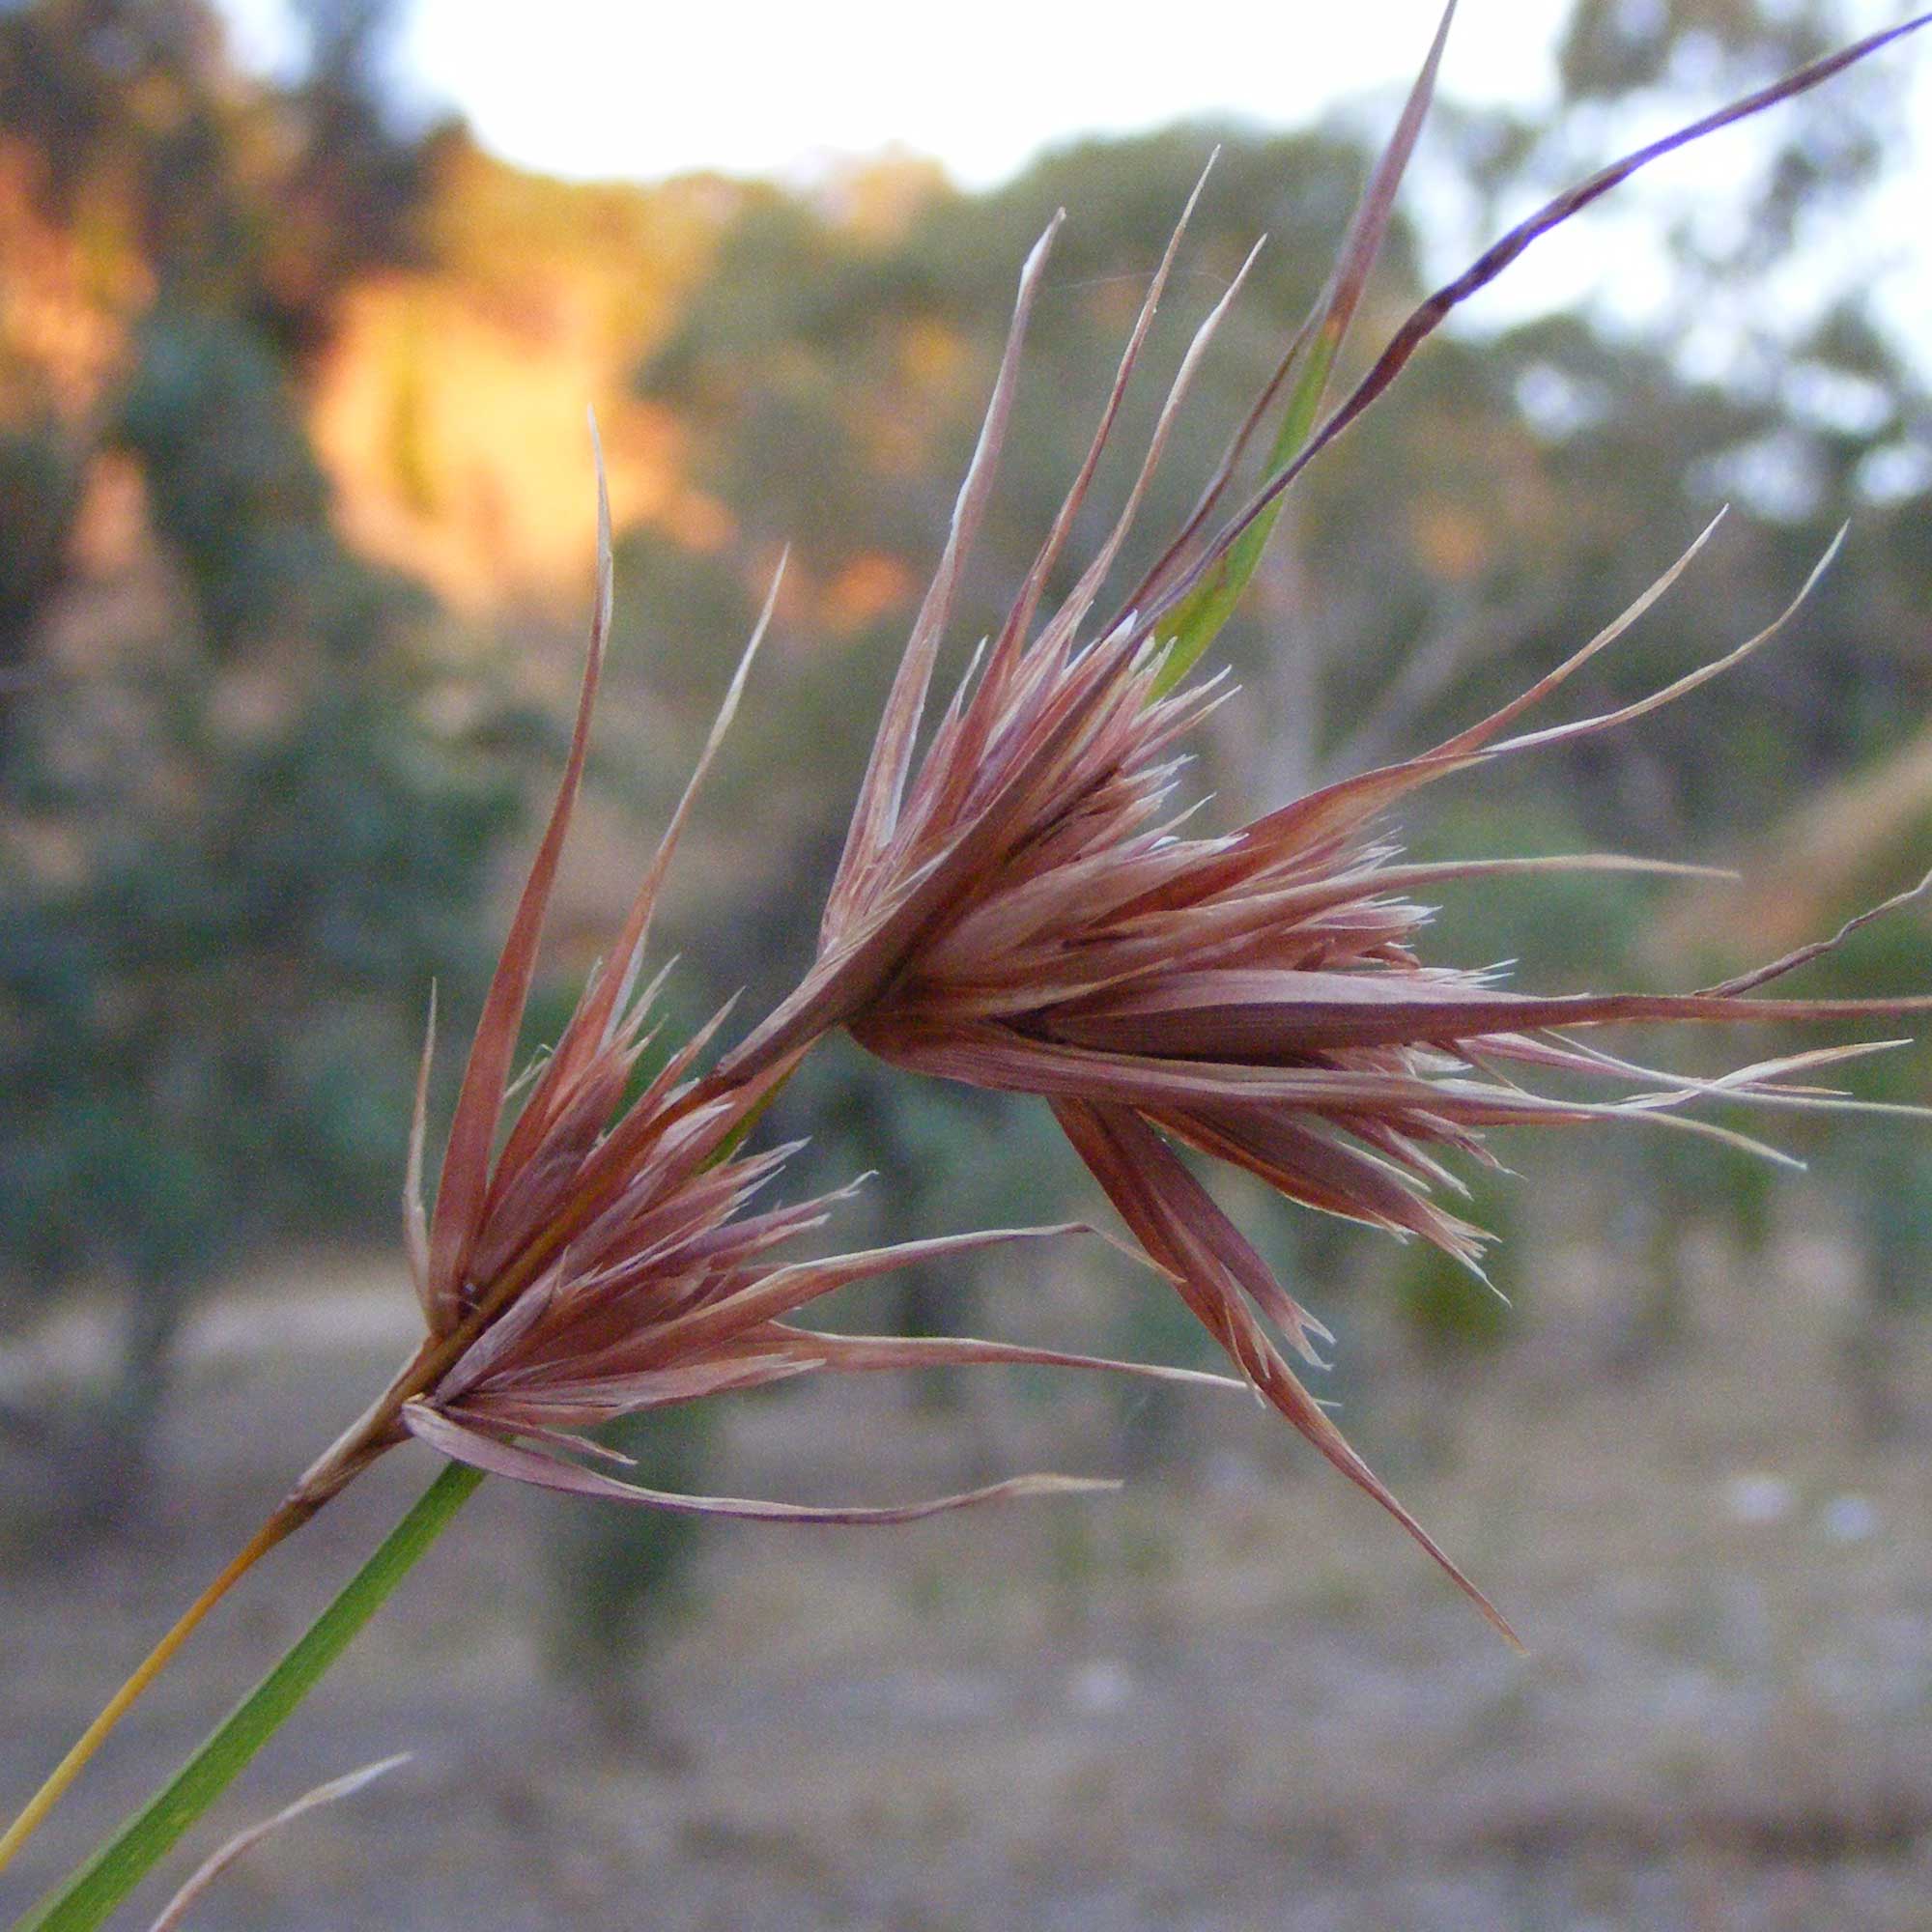 Photograph of the inflorescence of kangaroo grass. The photo shows clusters of reddish spikelets on a stalk.